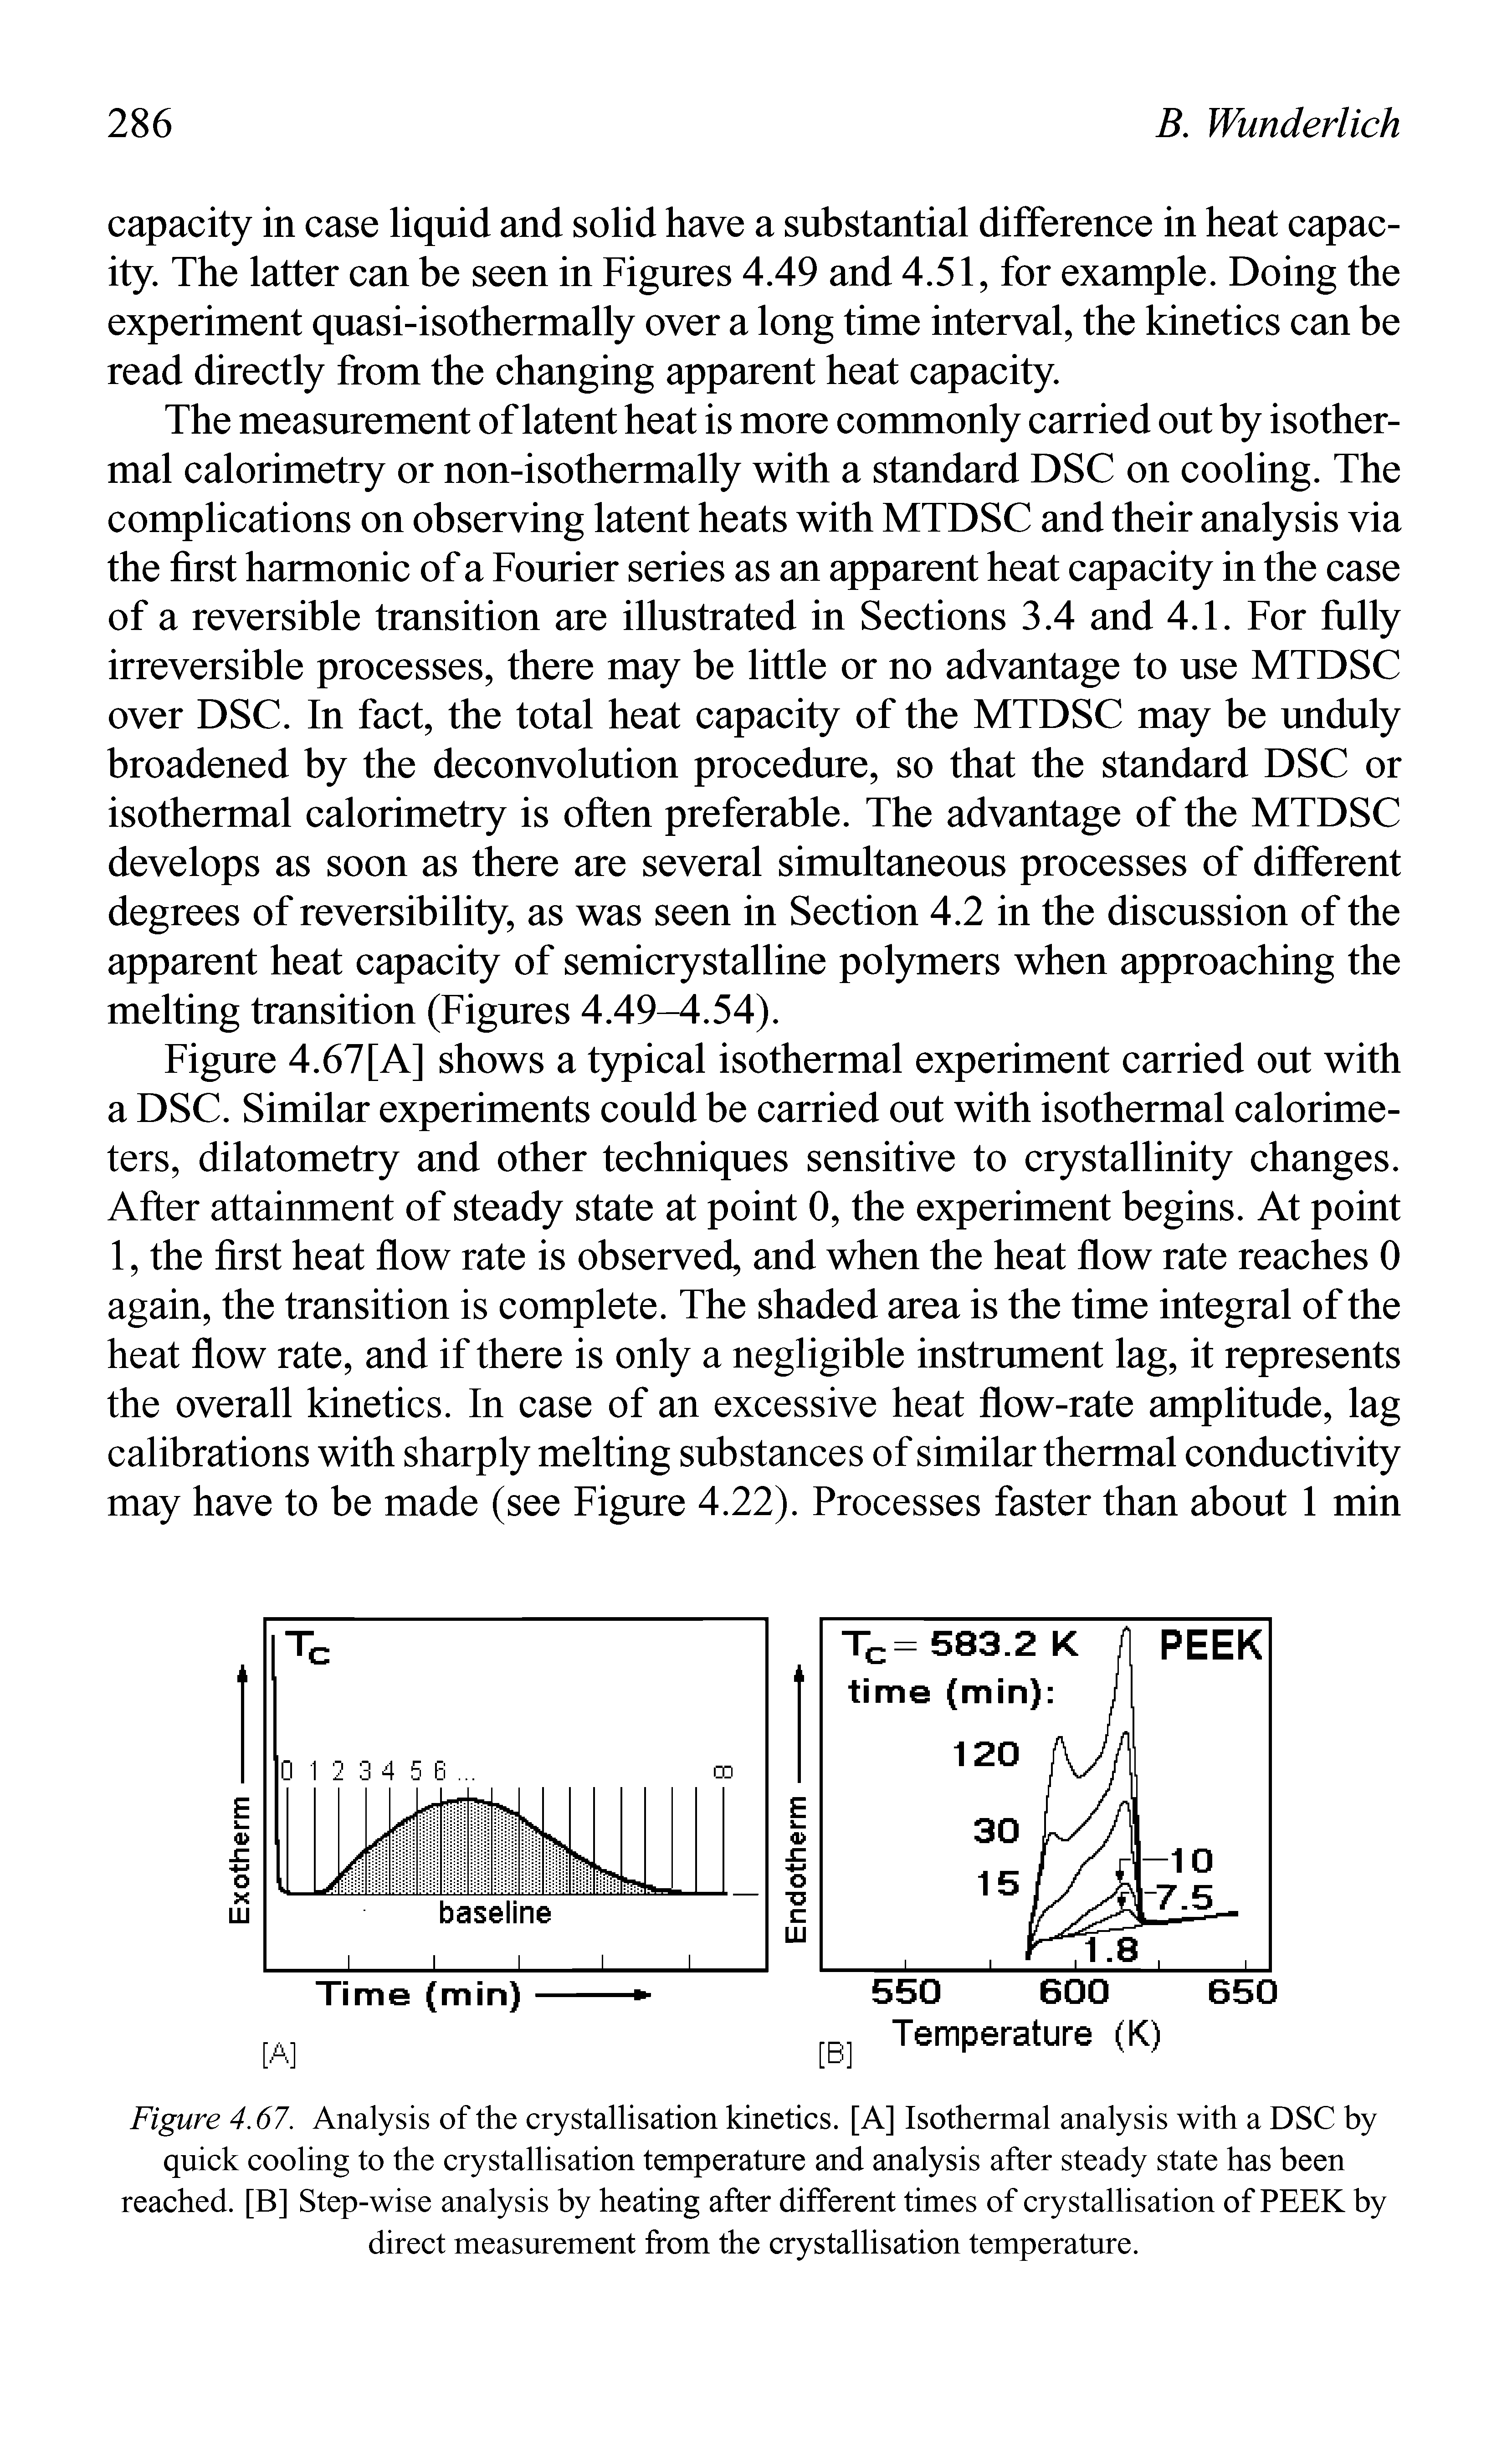 Figure 4.67[A] shows a typical isothermal experiment carried out with a DSC. Similar experiments could be carried out with isothermal calorimeters, dilatometry and other teehniques sensitive to crystallinity changes. After attainment of steady state at point 0, the experiment begins. At point 1, the first heat flow rate is observed, and when the heat flow rate reaches 0 again, the transition is complete. The shaded area is the time integral of the heat flow rate, and if there is only a negligible instrument lag, it represents the overall kinetics. In case of an excessive heat flow-rate amplitude, lag calibrations with sharply melting substances of similar thermal conductivity may have to be made (see Figure 4.22). Processes faster than about 1 min...